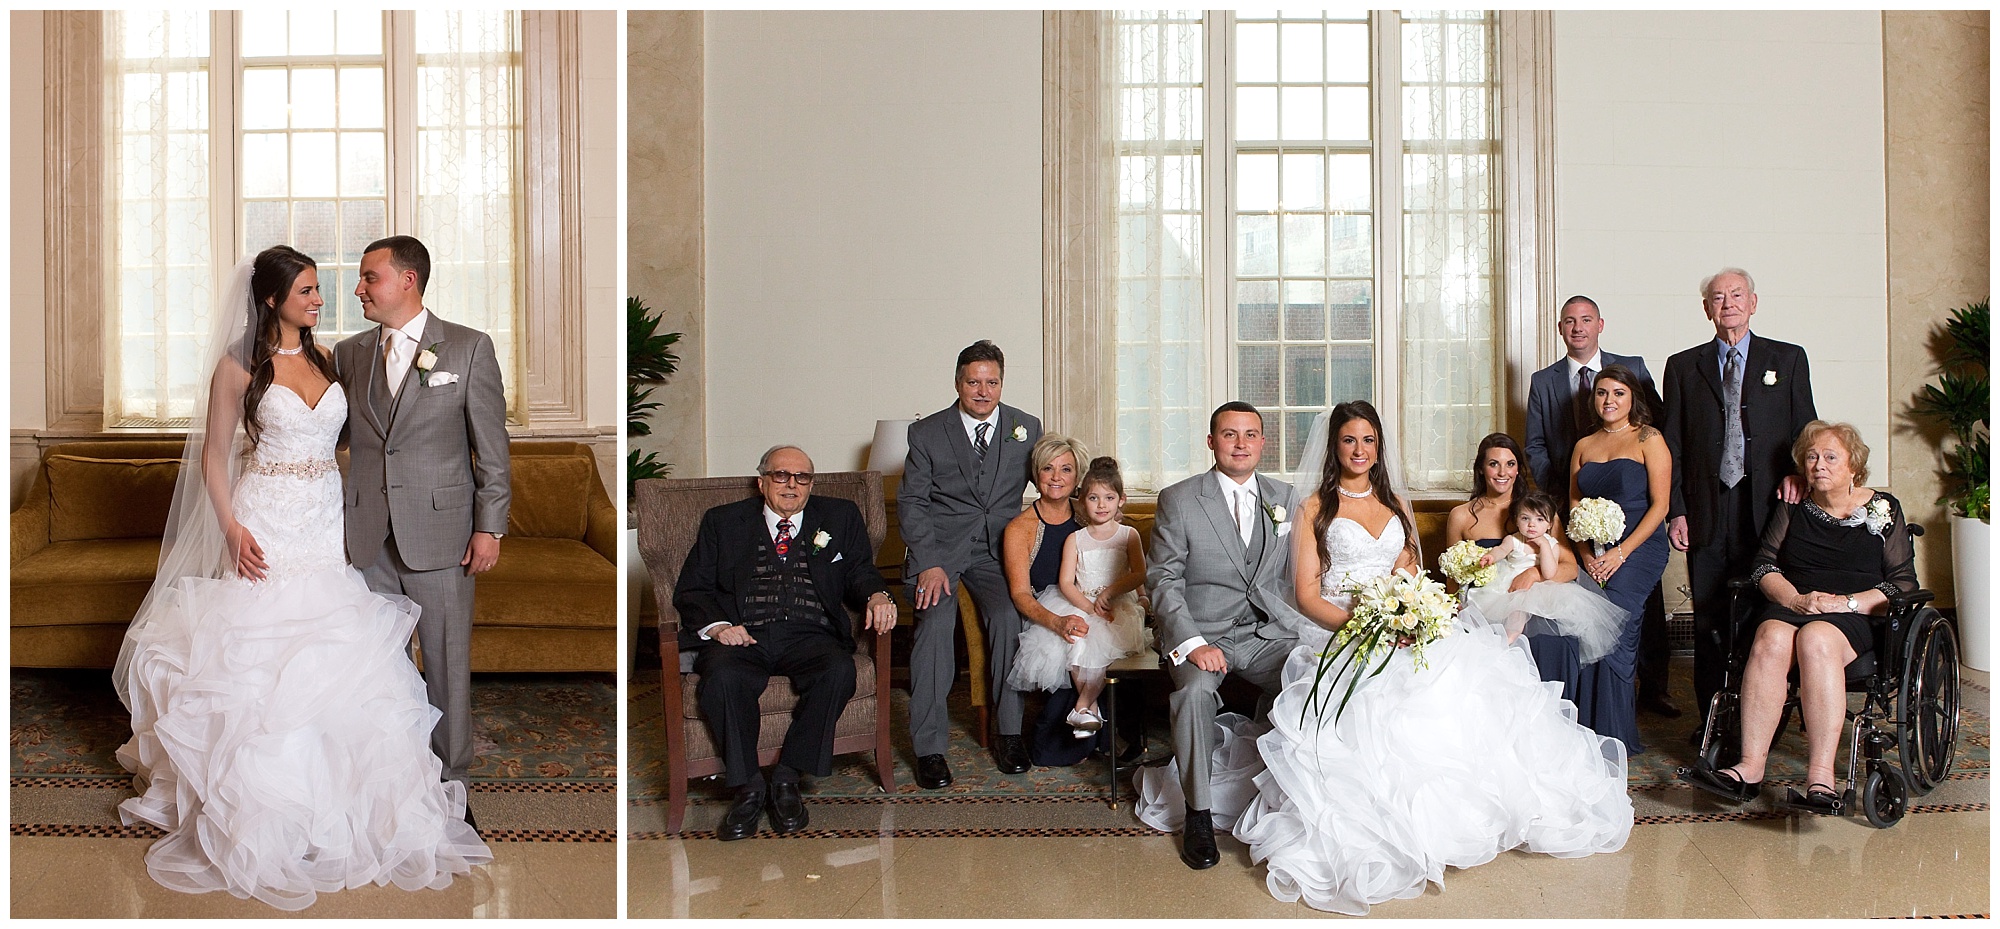 Two photos, a bride and groom portrait, and another with the grooms family